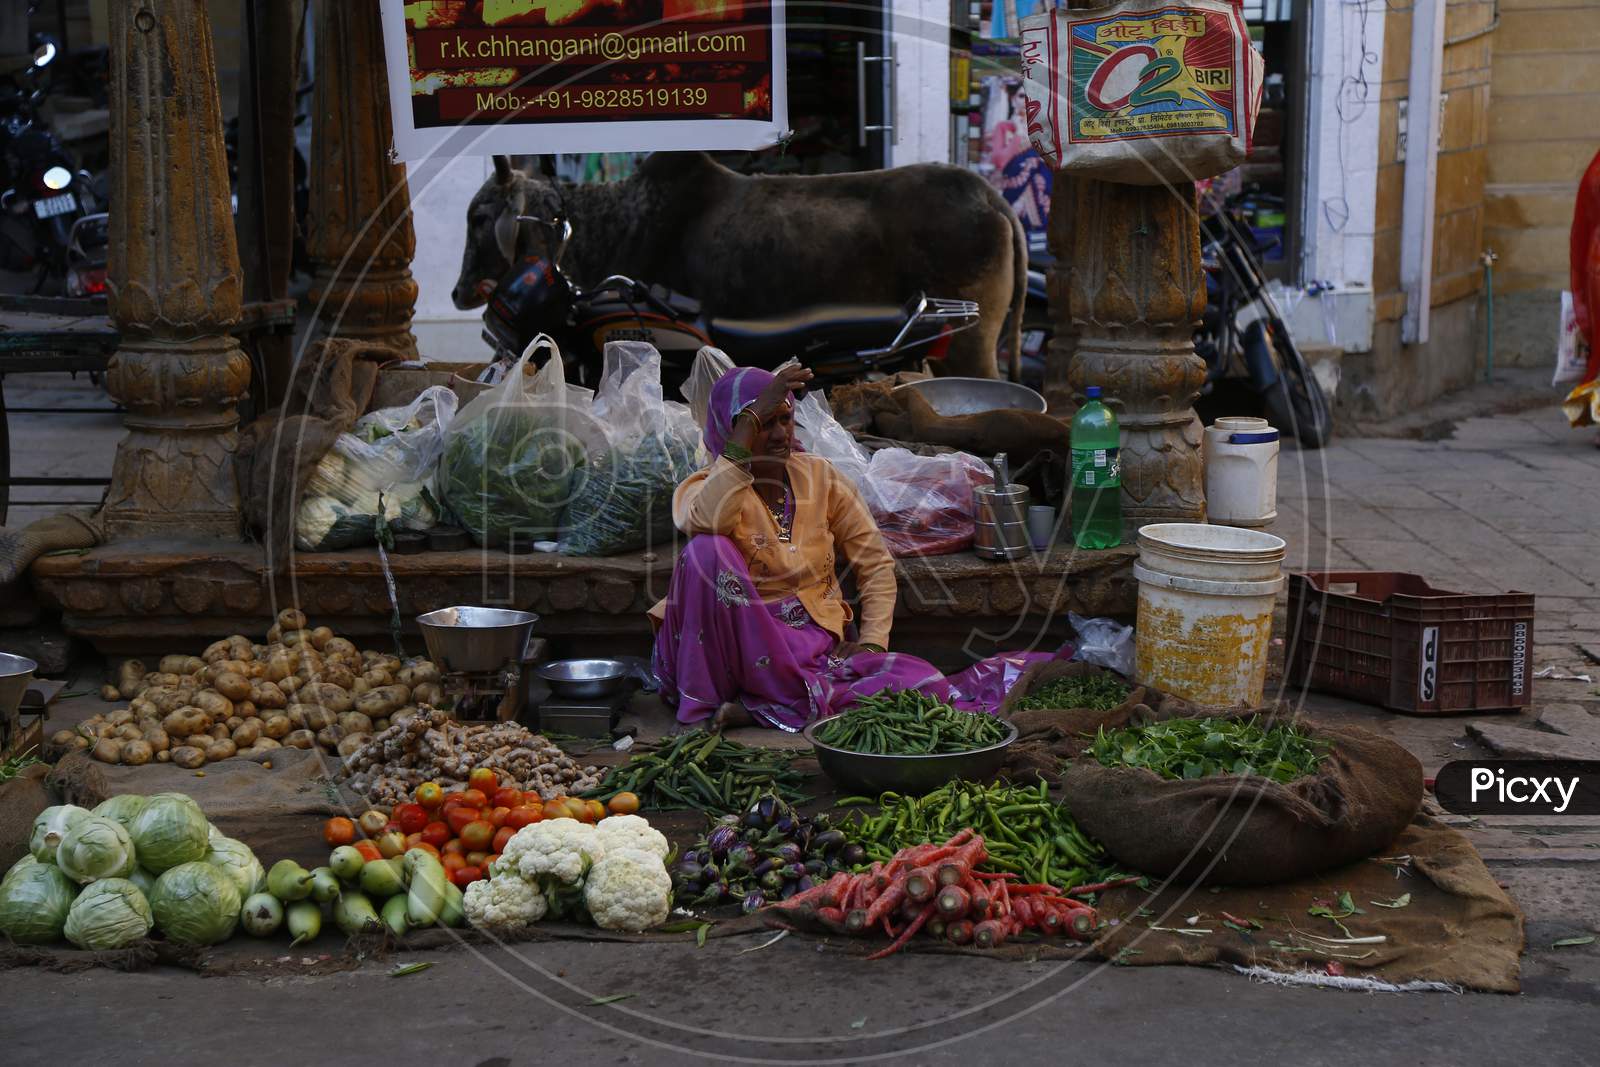 A Vegetable Vendor On The Streets of Jaisalmer, Rajasthan, India